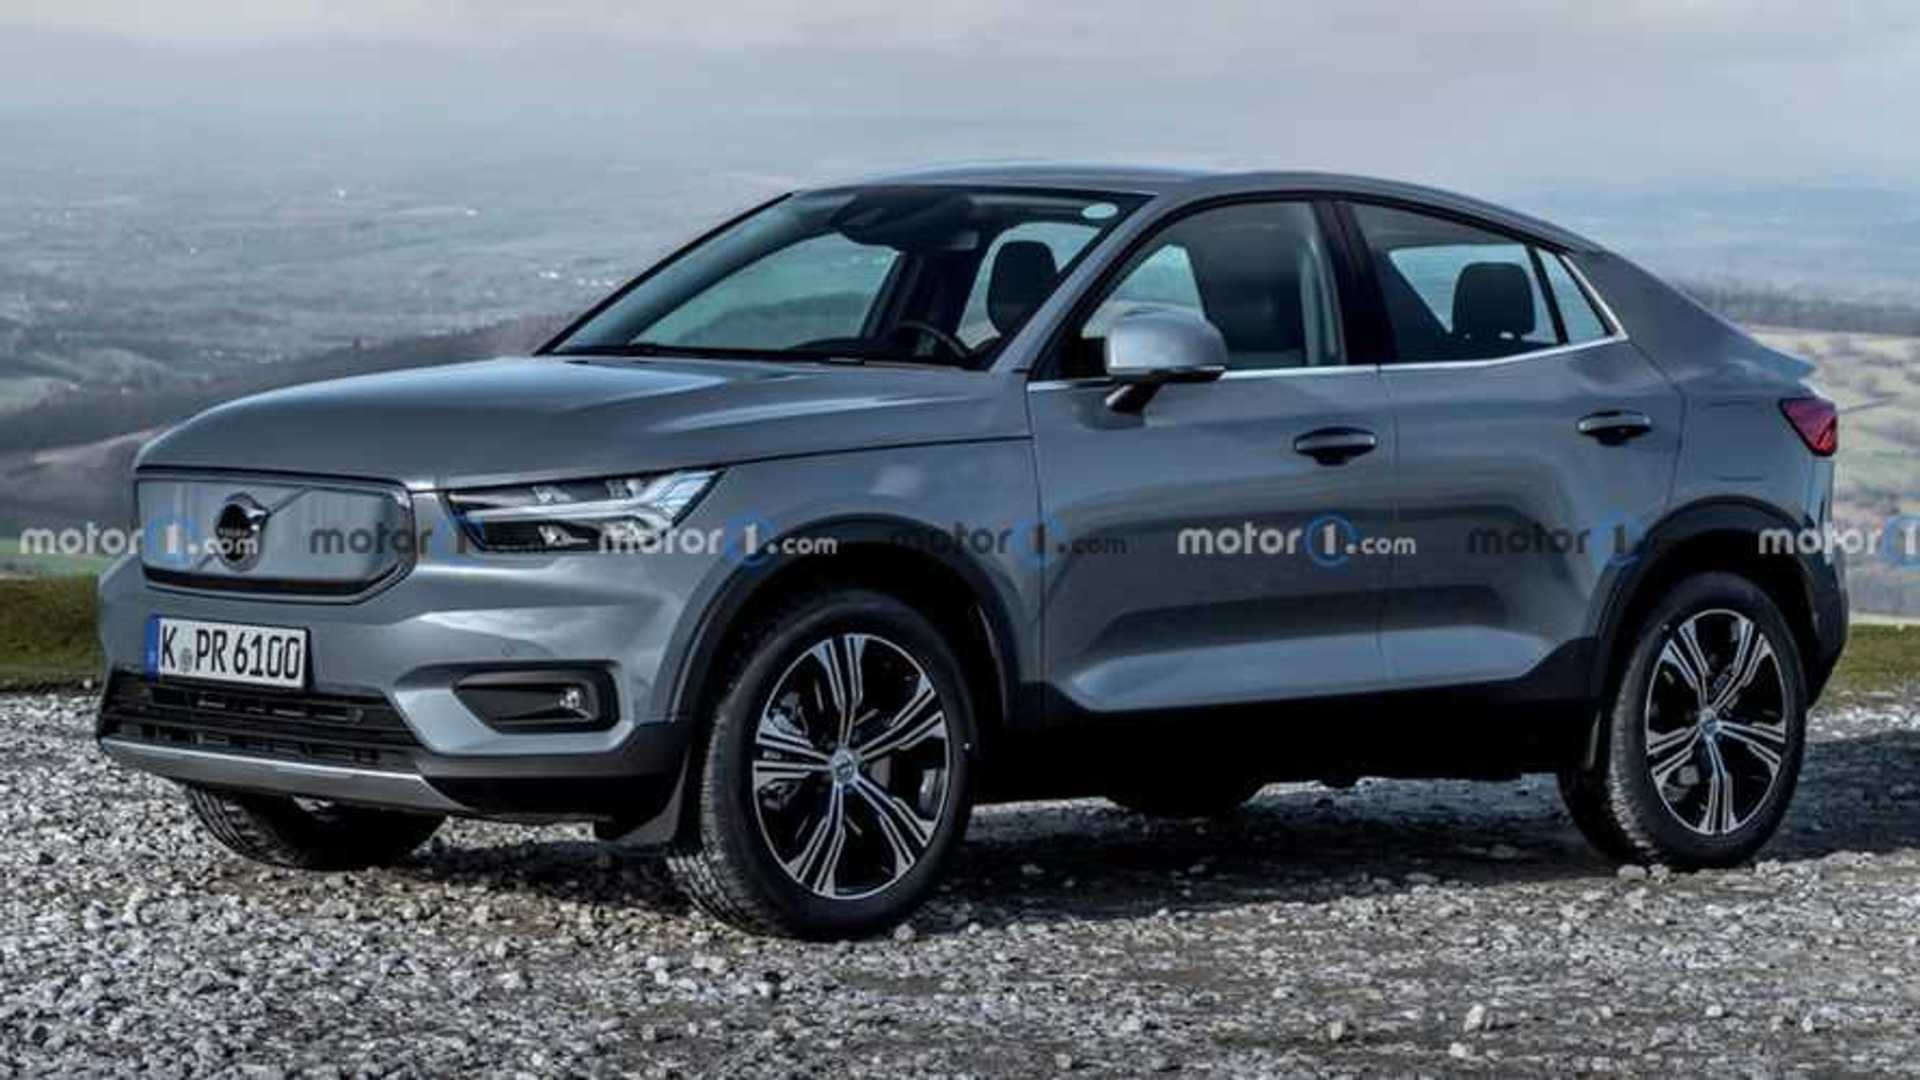 2022 Volvo EV Speculatively Rendered As An XC40 Coupe